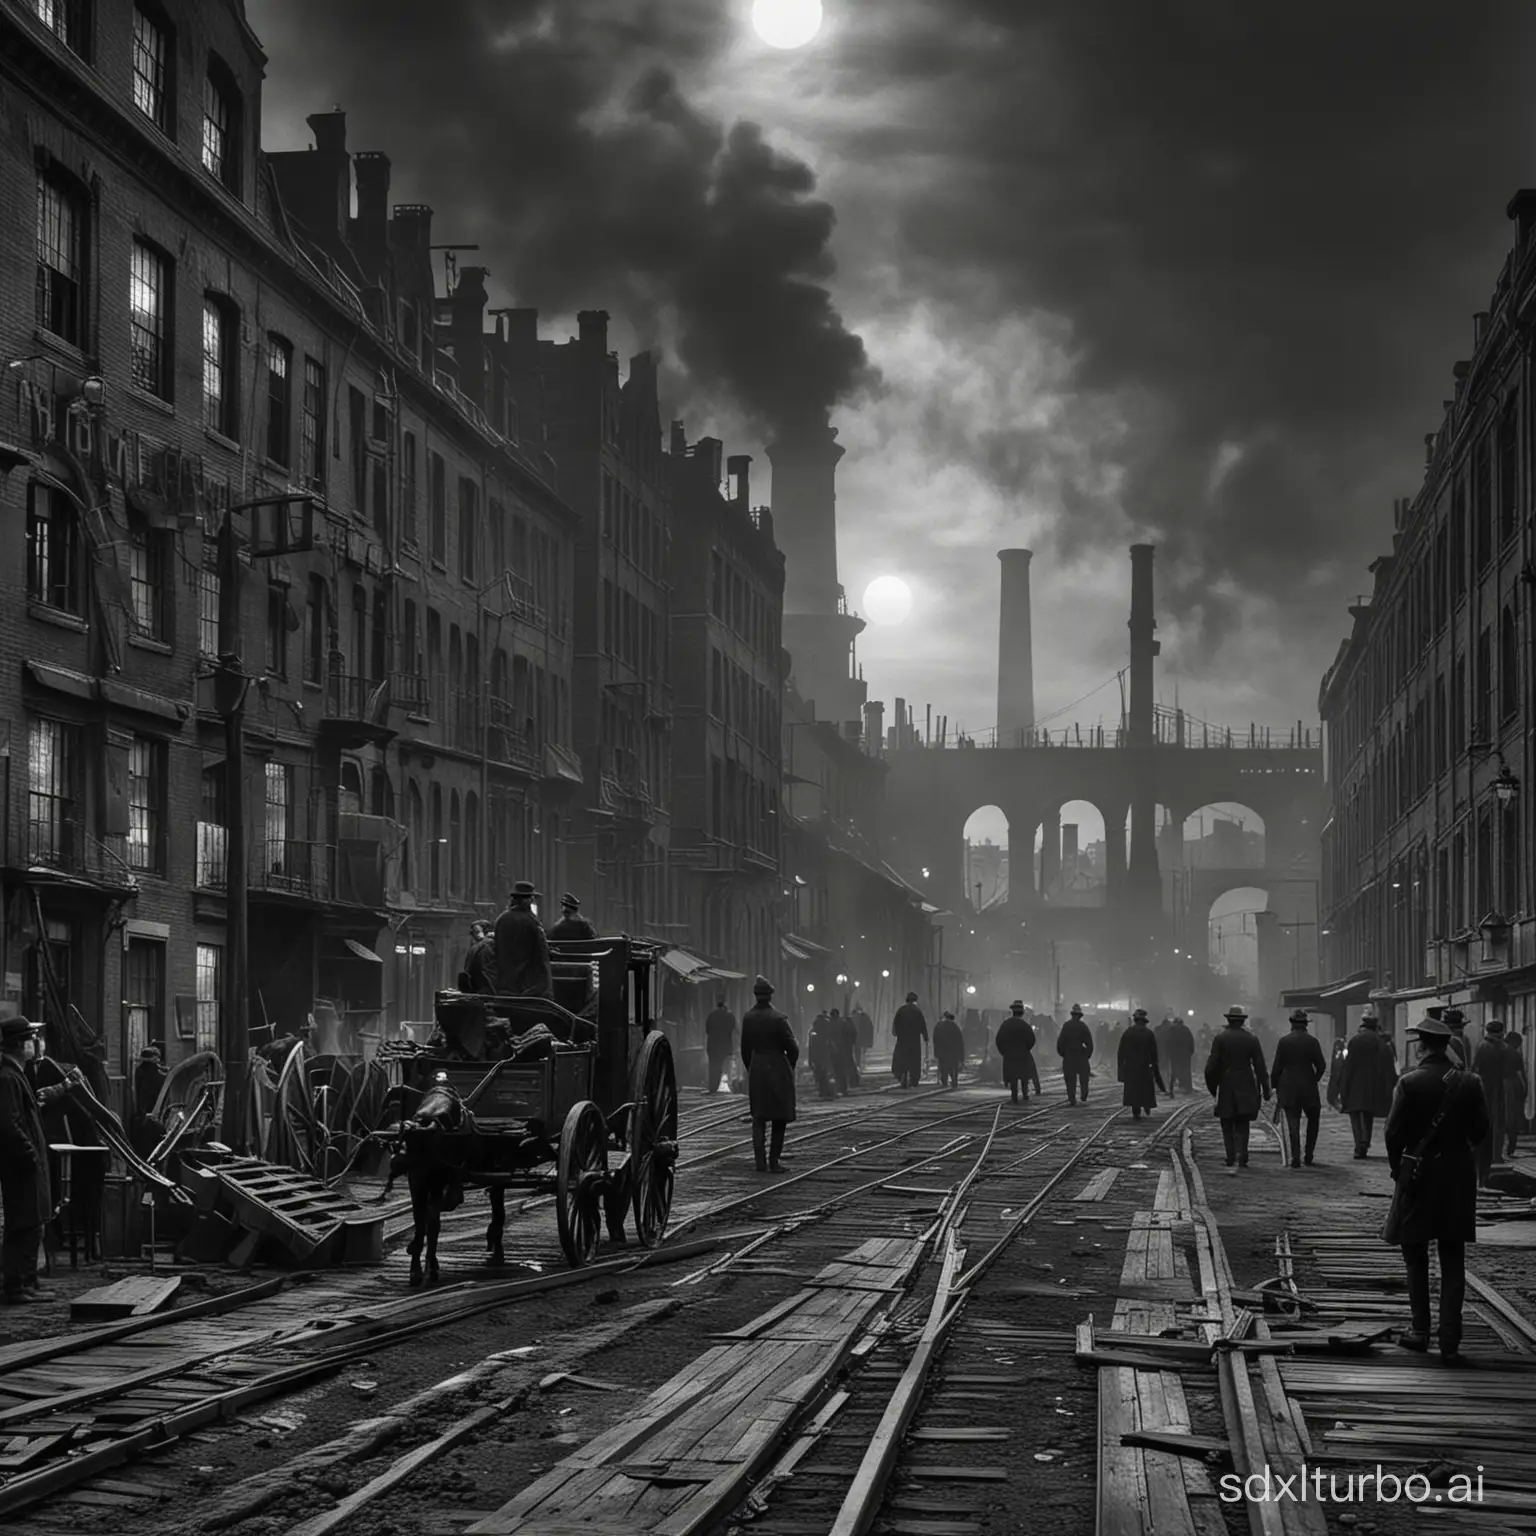 What did the dark industrialization look like in the 19th century in the Empire?